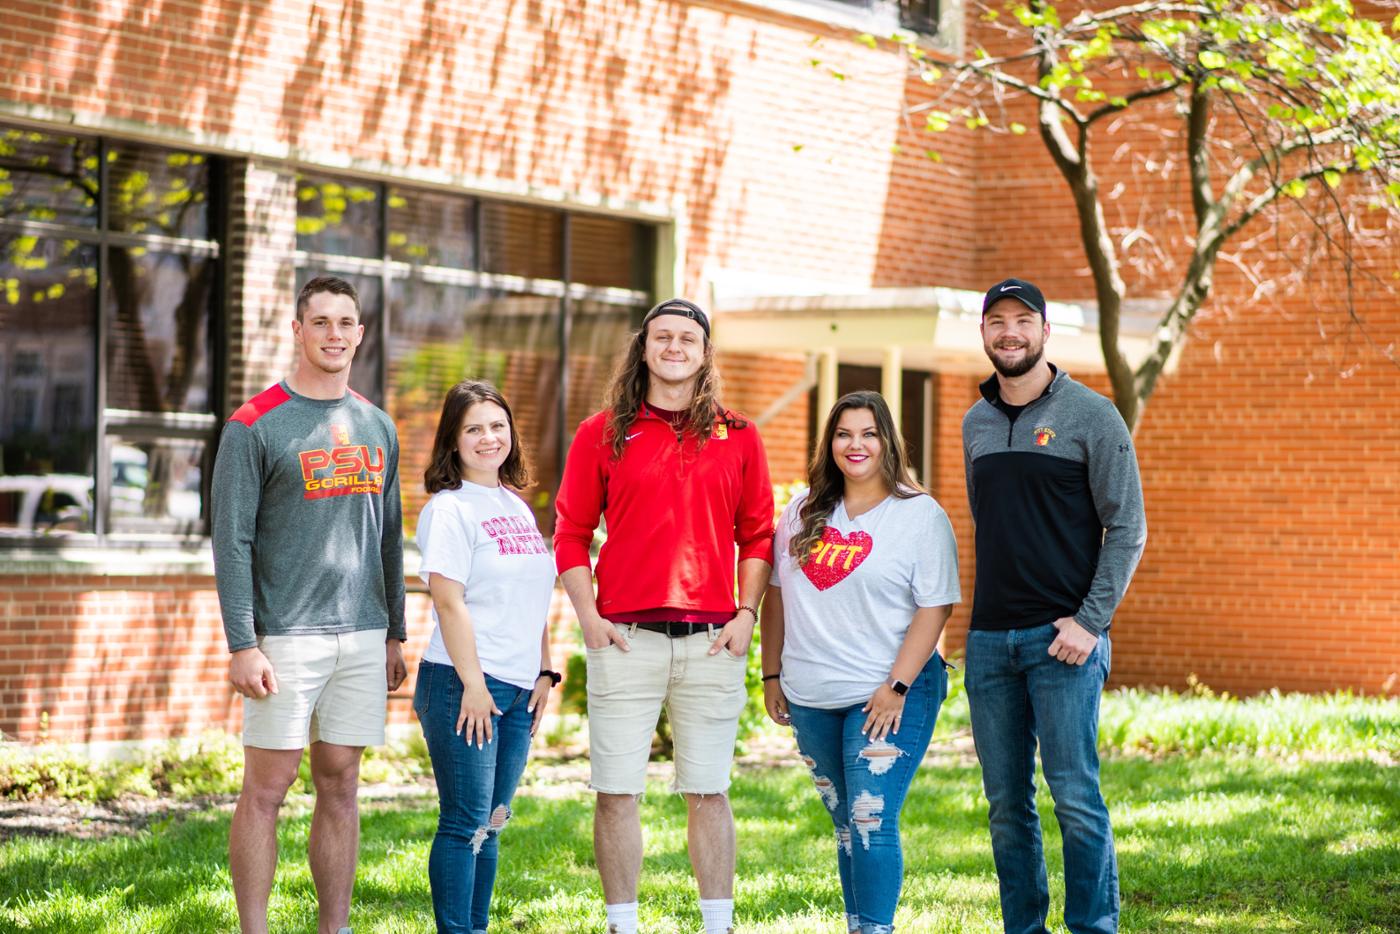 Management major students at Kelce college of business at Pittsburg State